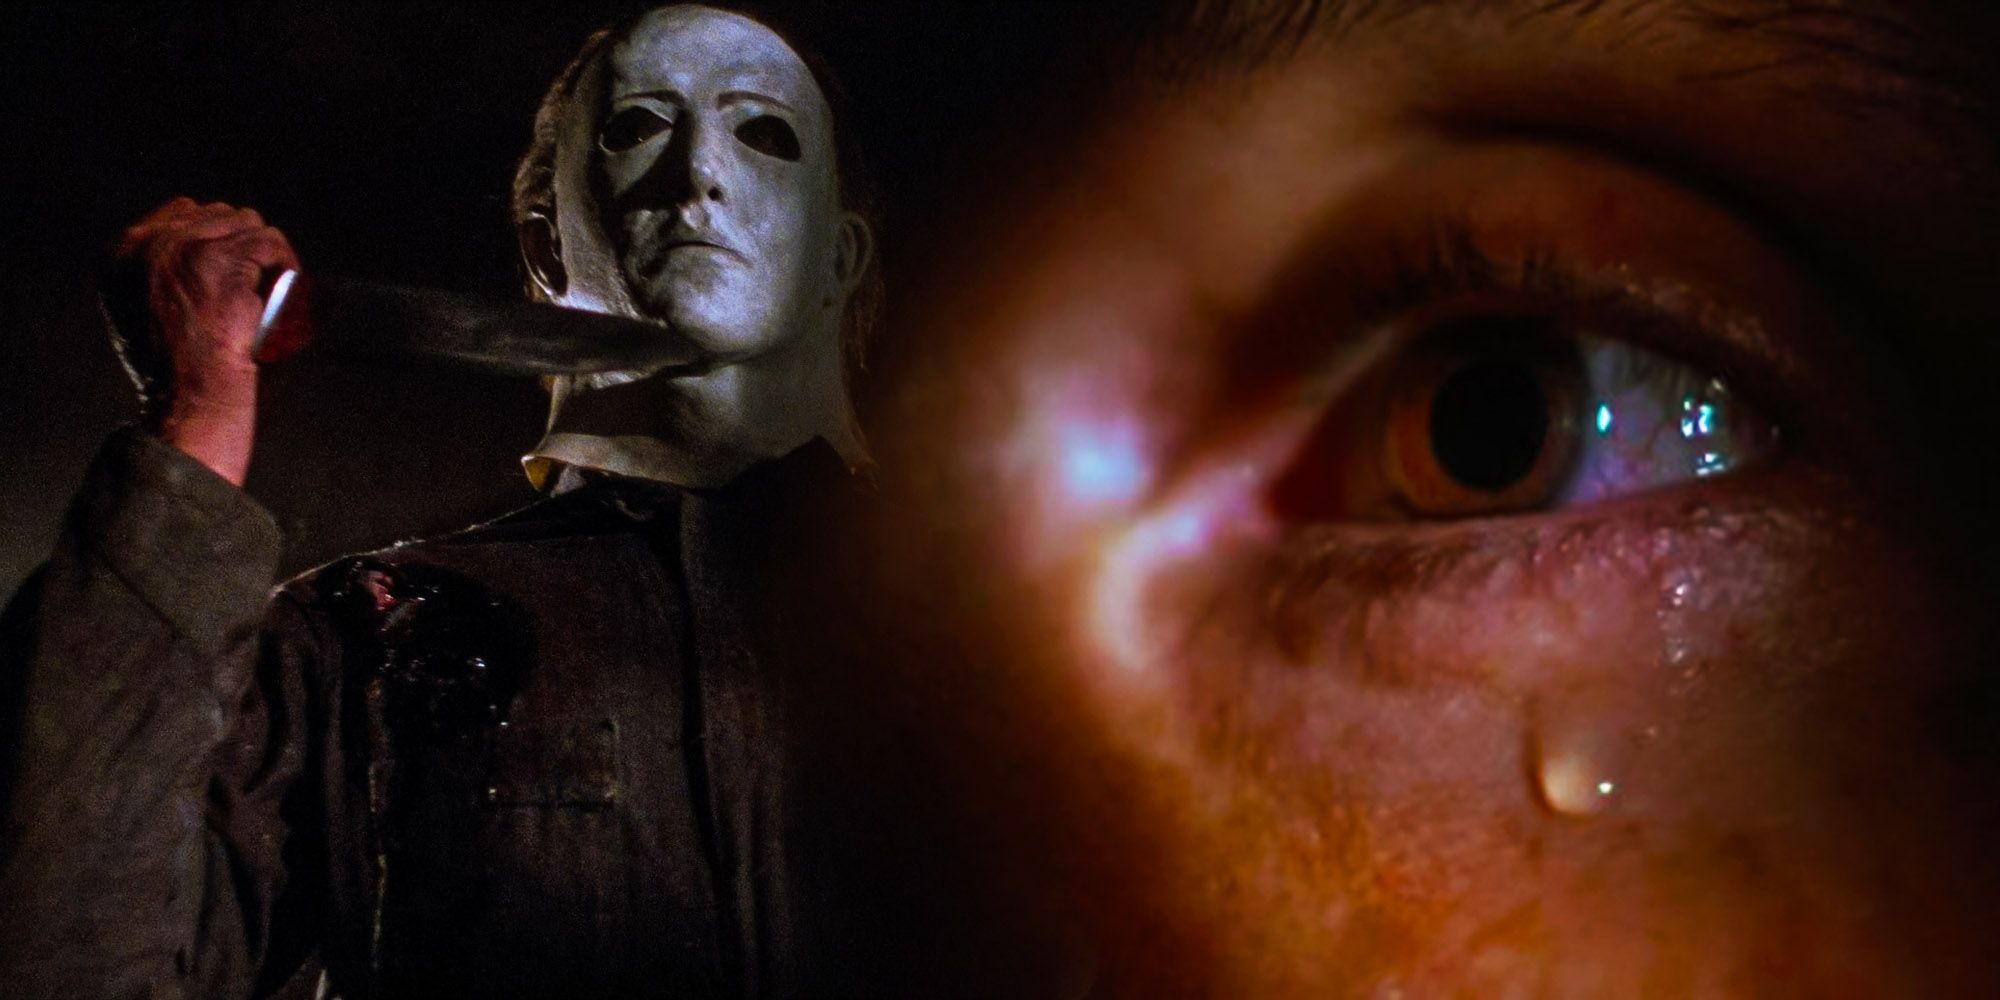 Why Michael Myers Cried In Halloween 5 (& Why It Was Controversial)